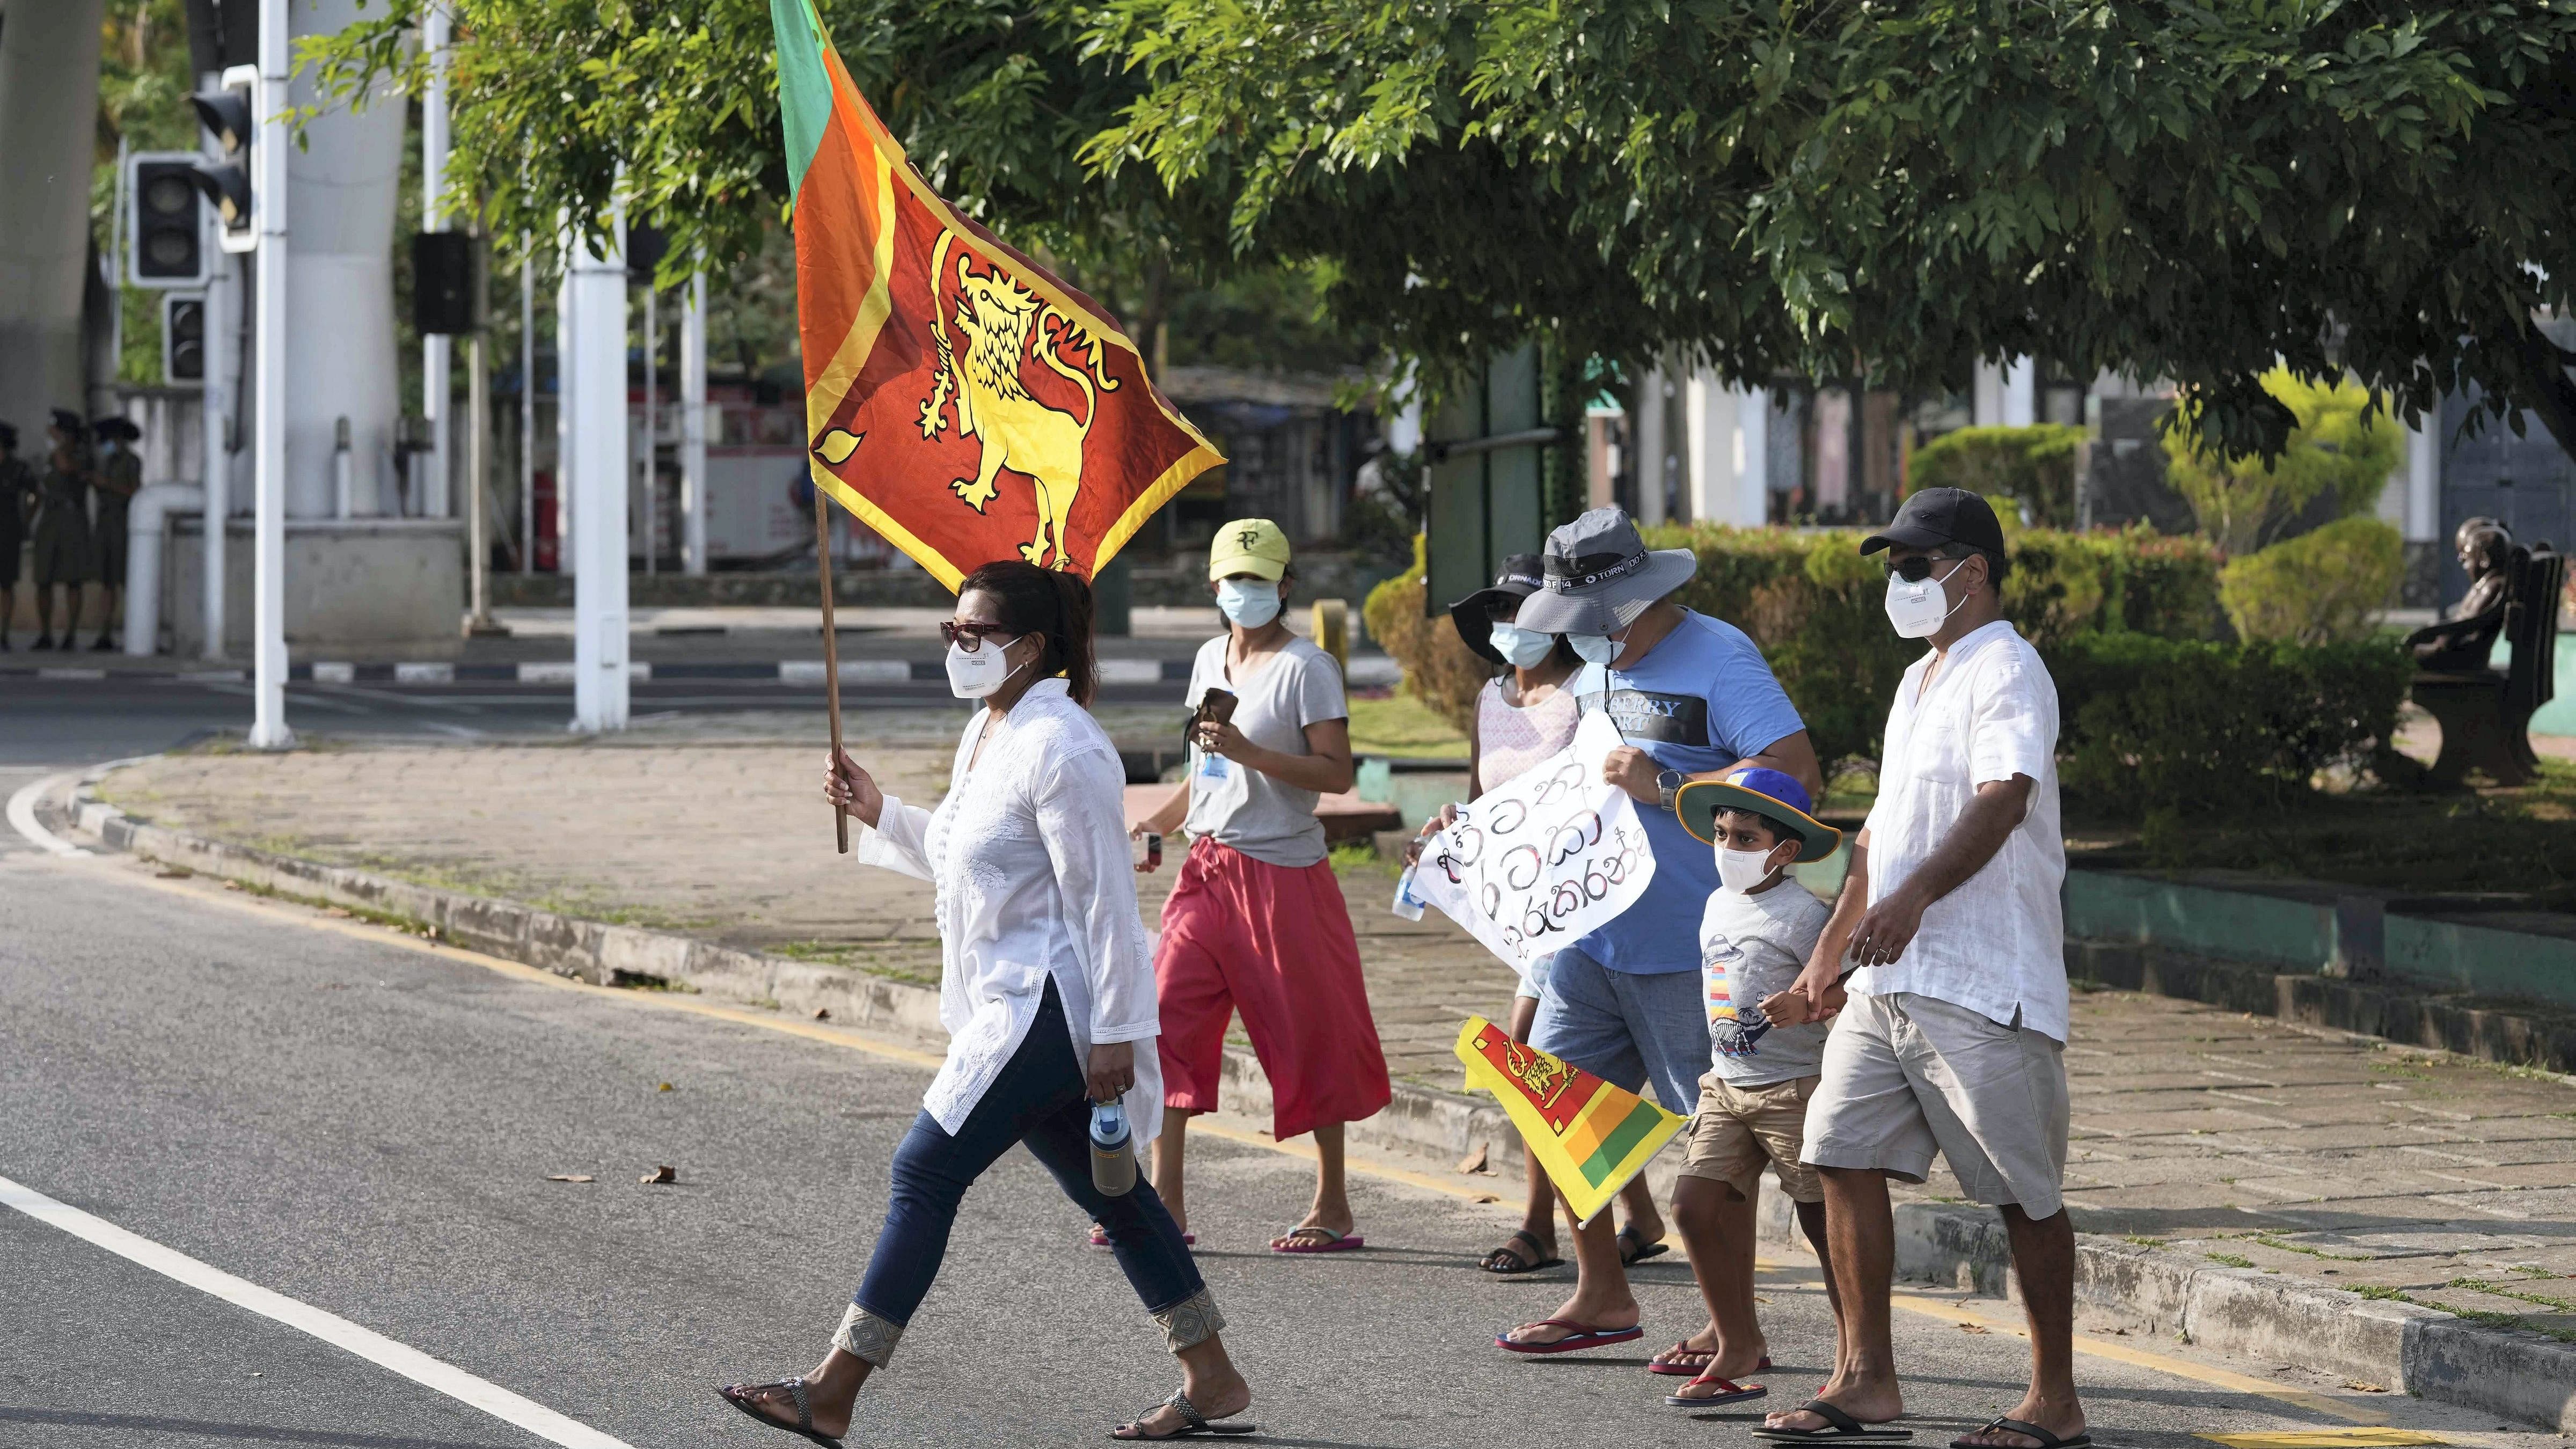 Dollar crunch, mainly due to foreign borrowings, led to Sri Lanka's massive economic downfall. Credit: AP Photo